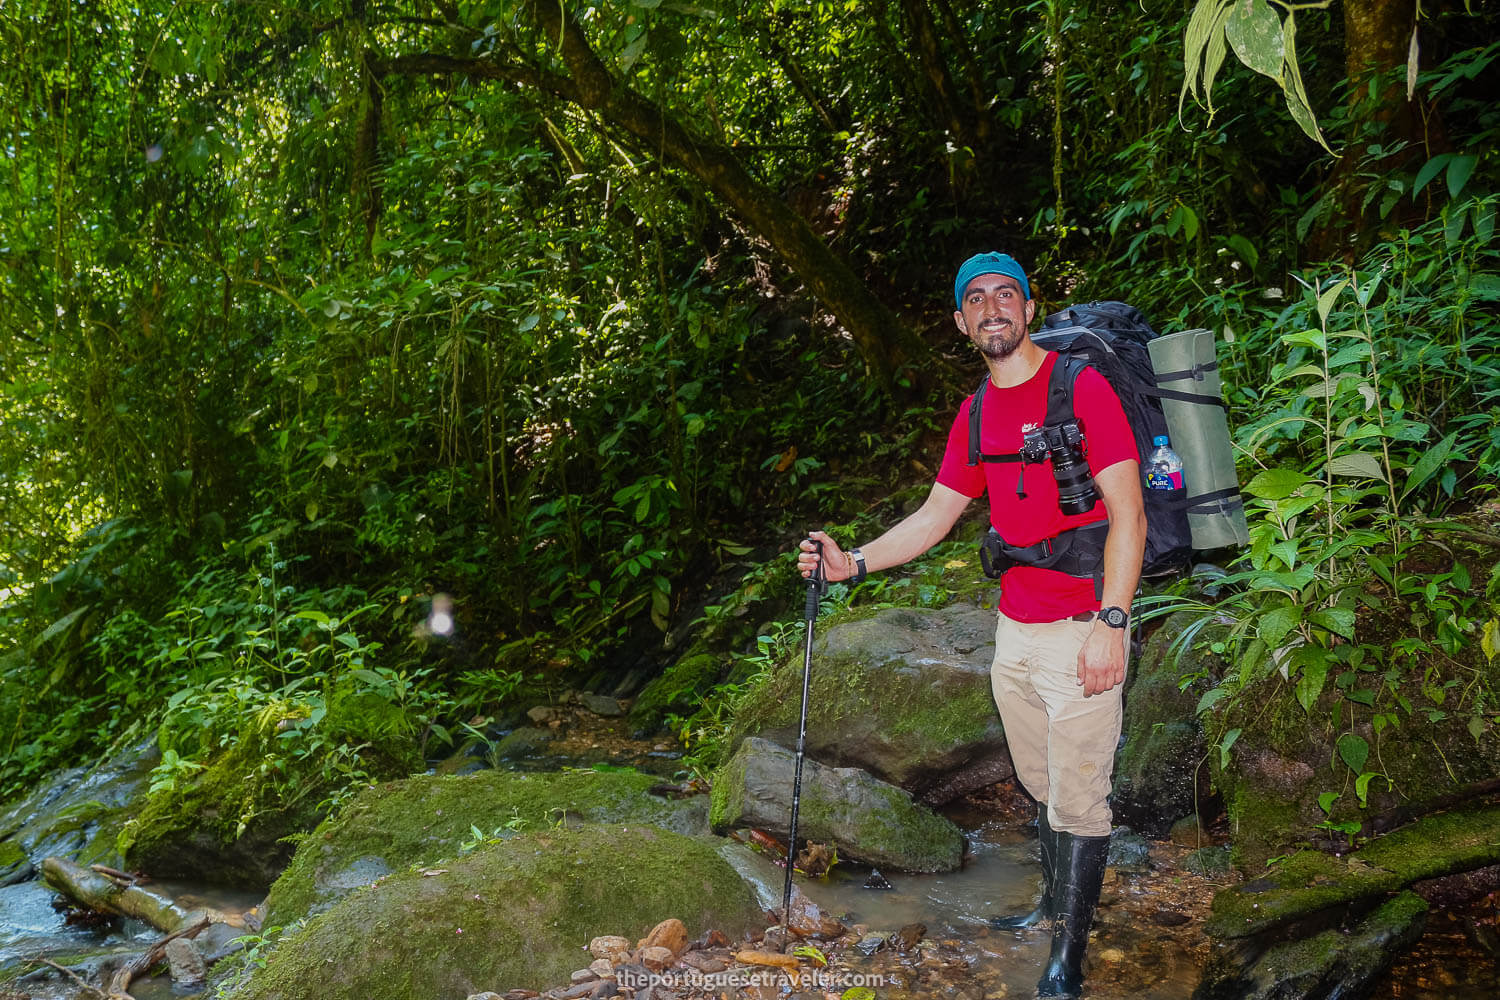 Me at the first stop on the hike through the jungle up to the community. An Adventure Photographer guide.